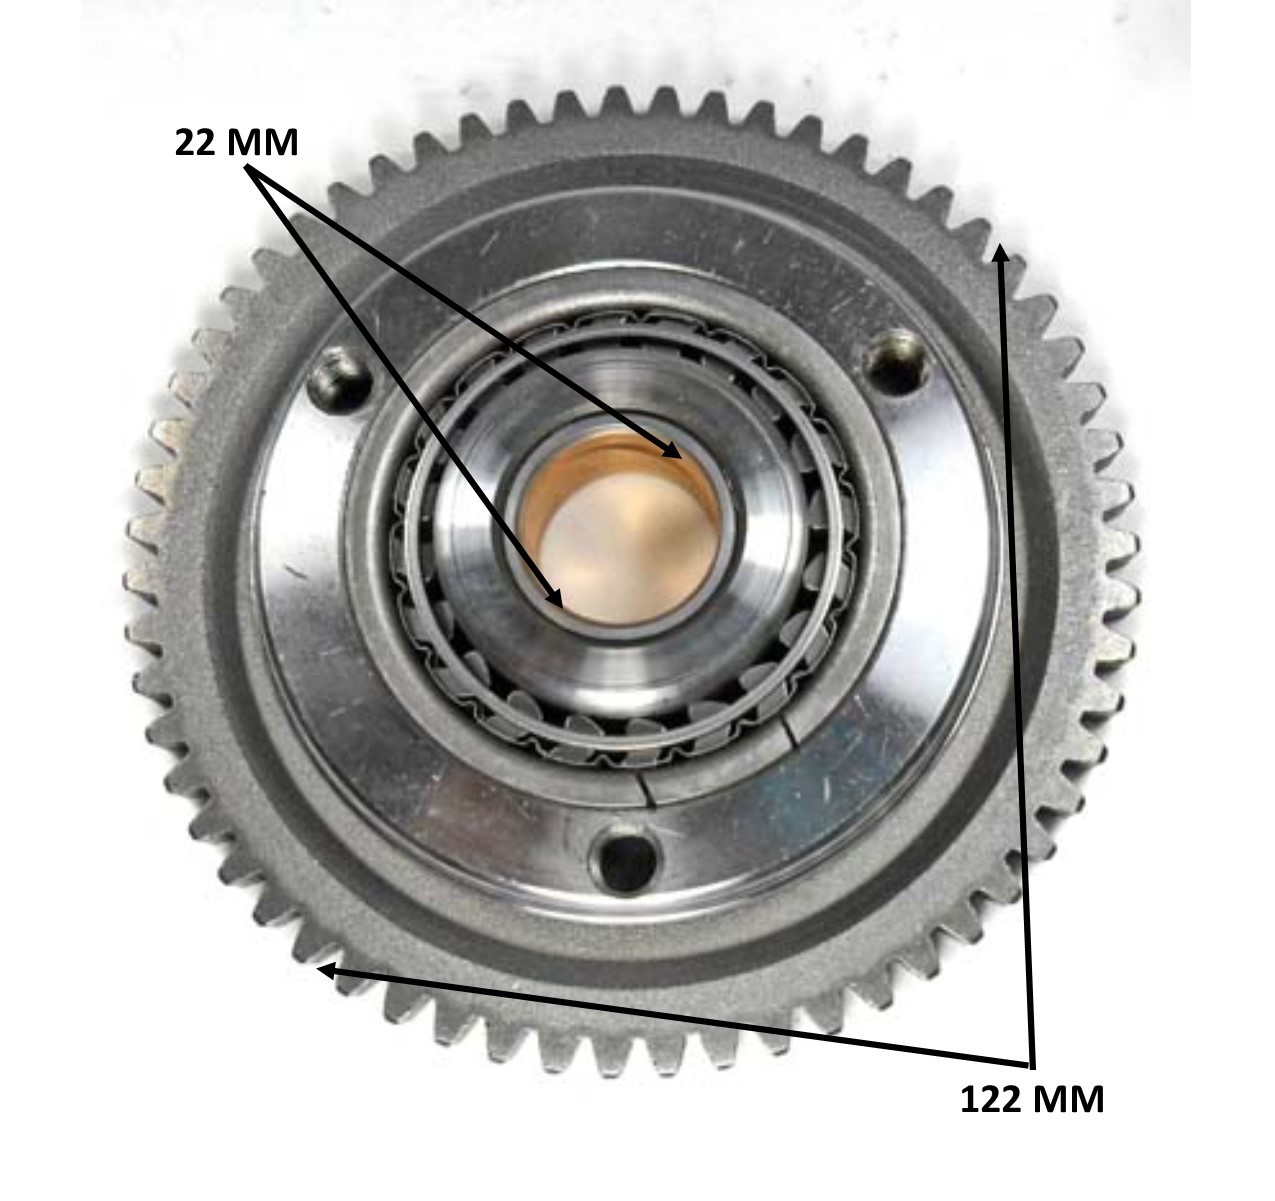 STARTER CLUTCH 250-300cc OD=122 ID=22 59th Fits Most GY6-CF-CN-CH 250cc + Honda Type Vertical Cylinder Motors Fits many ATVs, Dirtbikes, GoKarts, Scooters - Click Image to Close